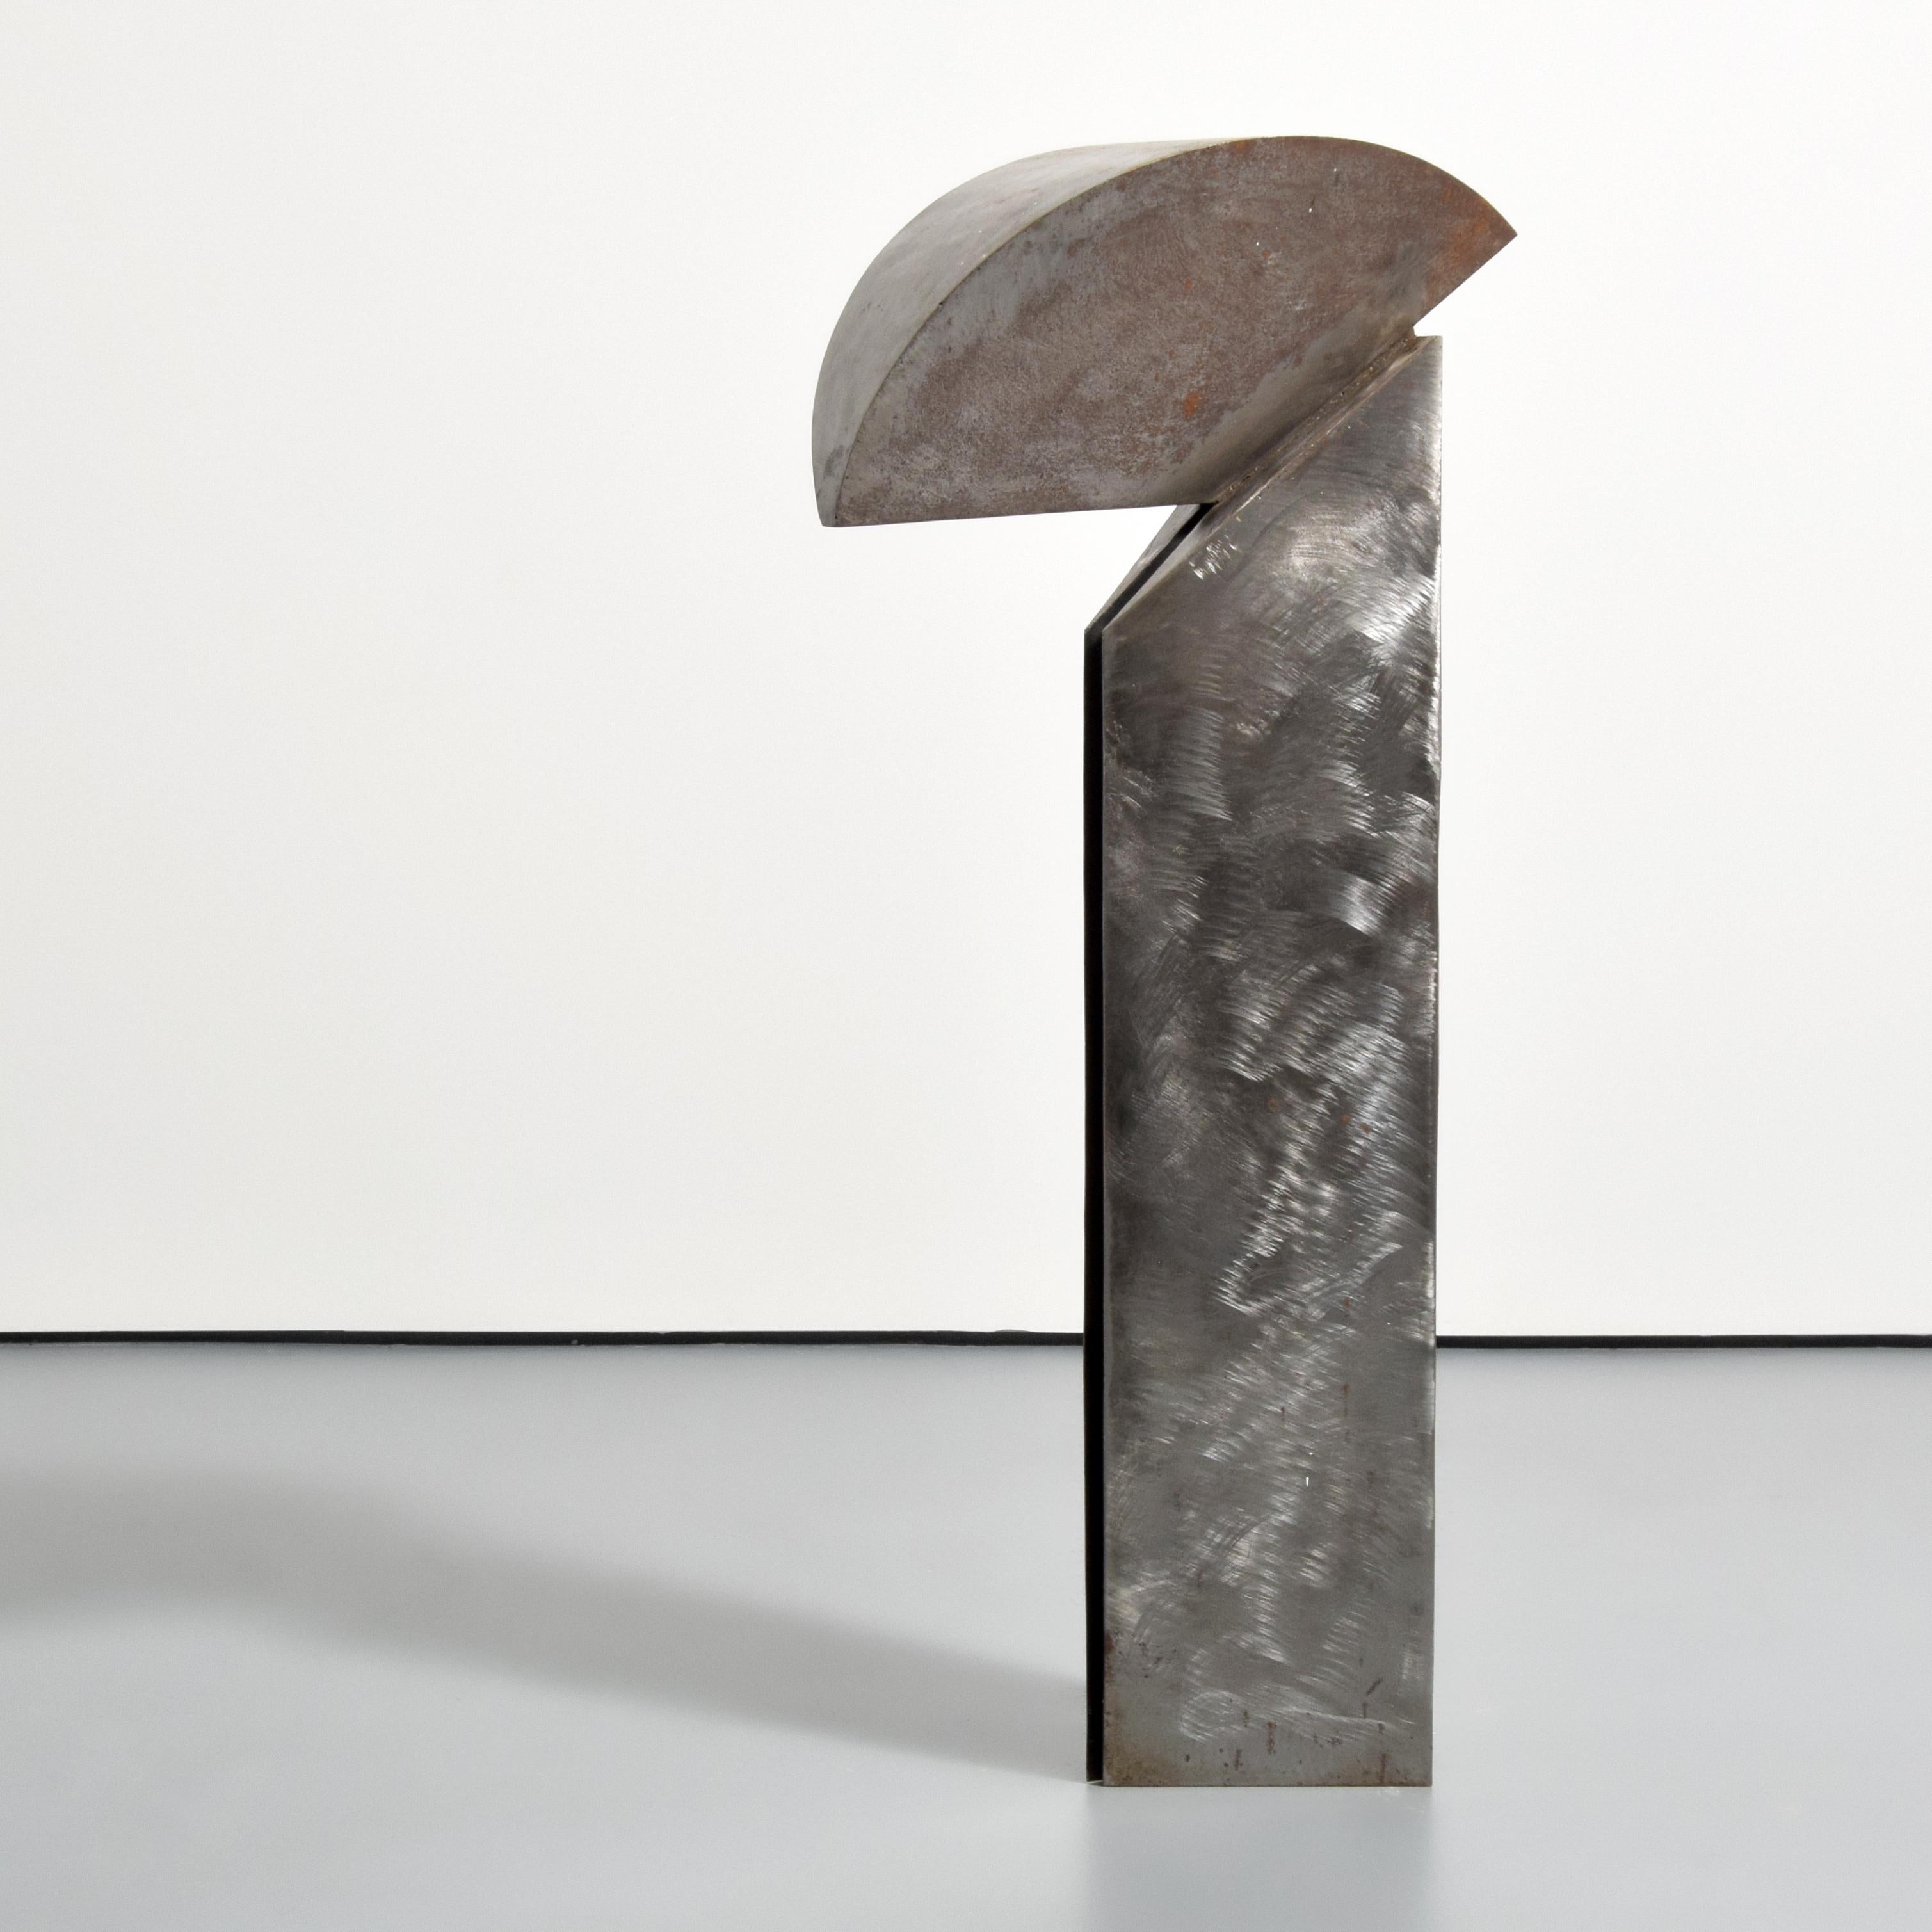 Additional Information: Billy Lee is well exhibited worldwide and known for his large abstract minimalist sculptures. He has received numerous prestigious awards including the Rodin Prize at the Fujisankei Biennale and the Giacomo Manzu prize at the